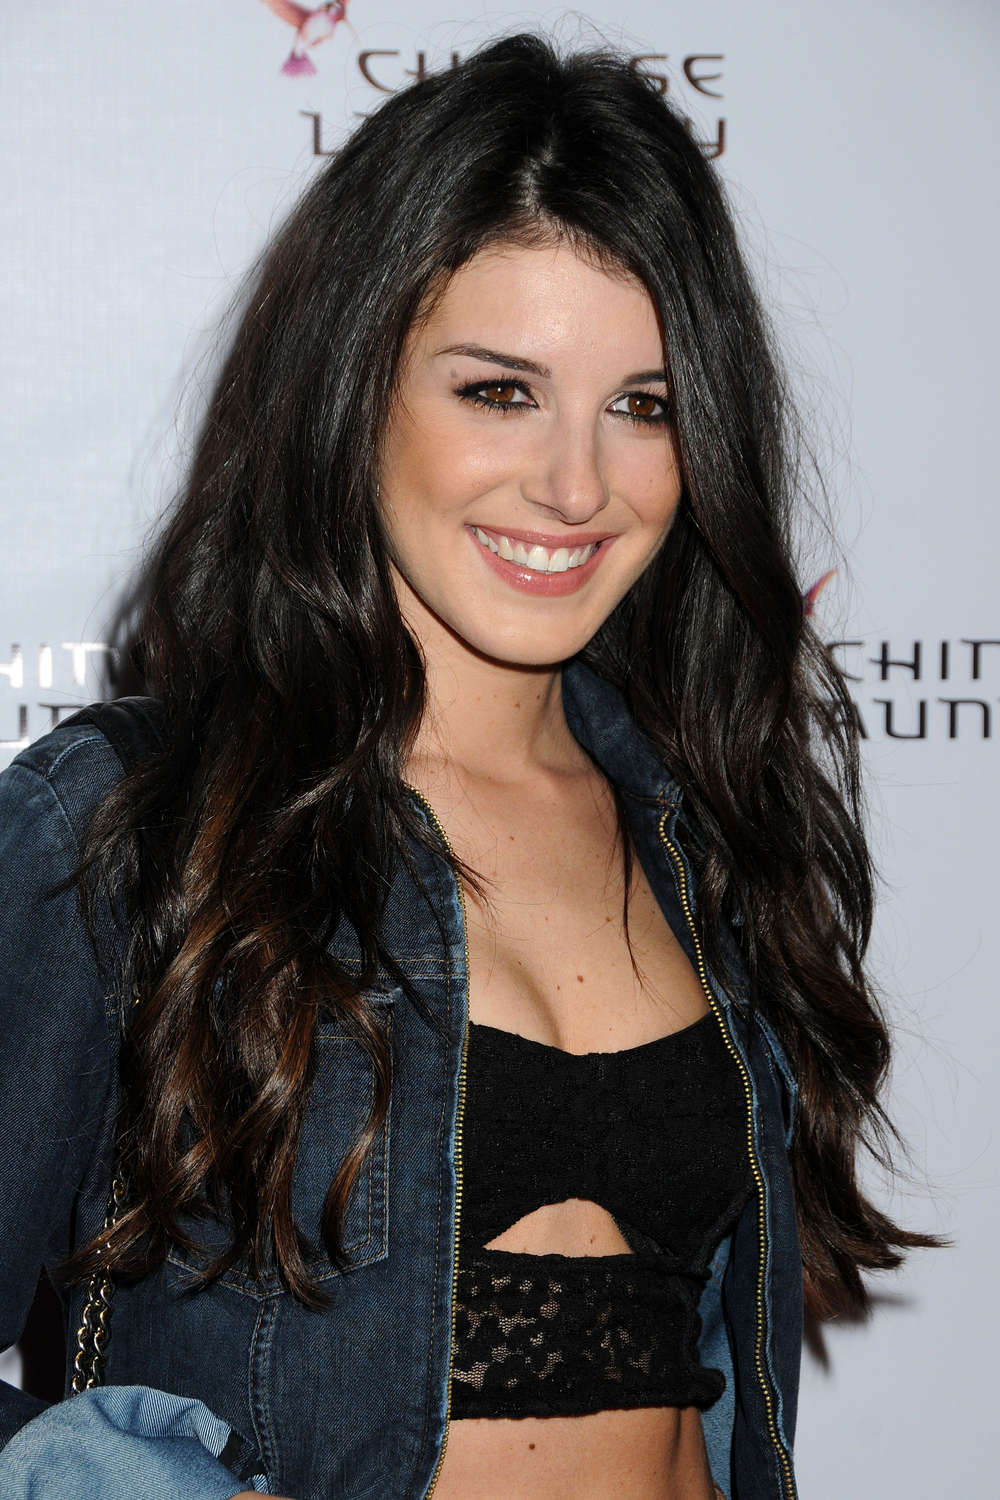 Shenae Grimes at The Launch Of Chinese Laundry Fashion Denim In Hollywood